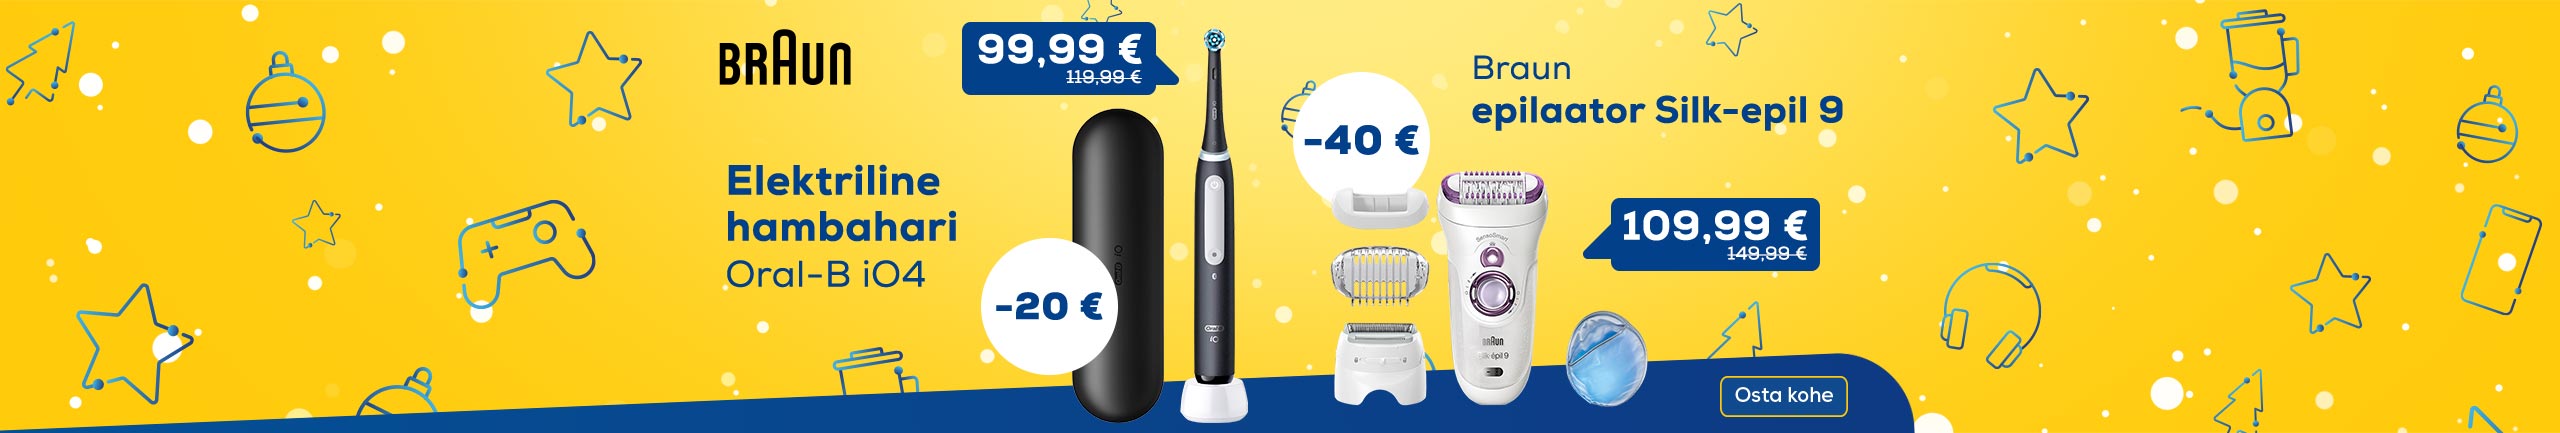 Braun and Oral-B products with good price!